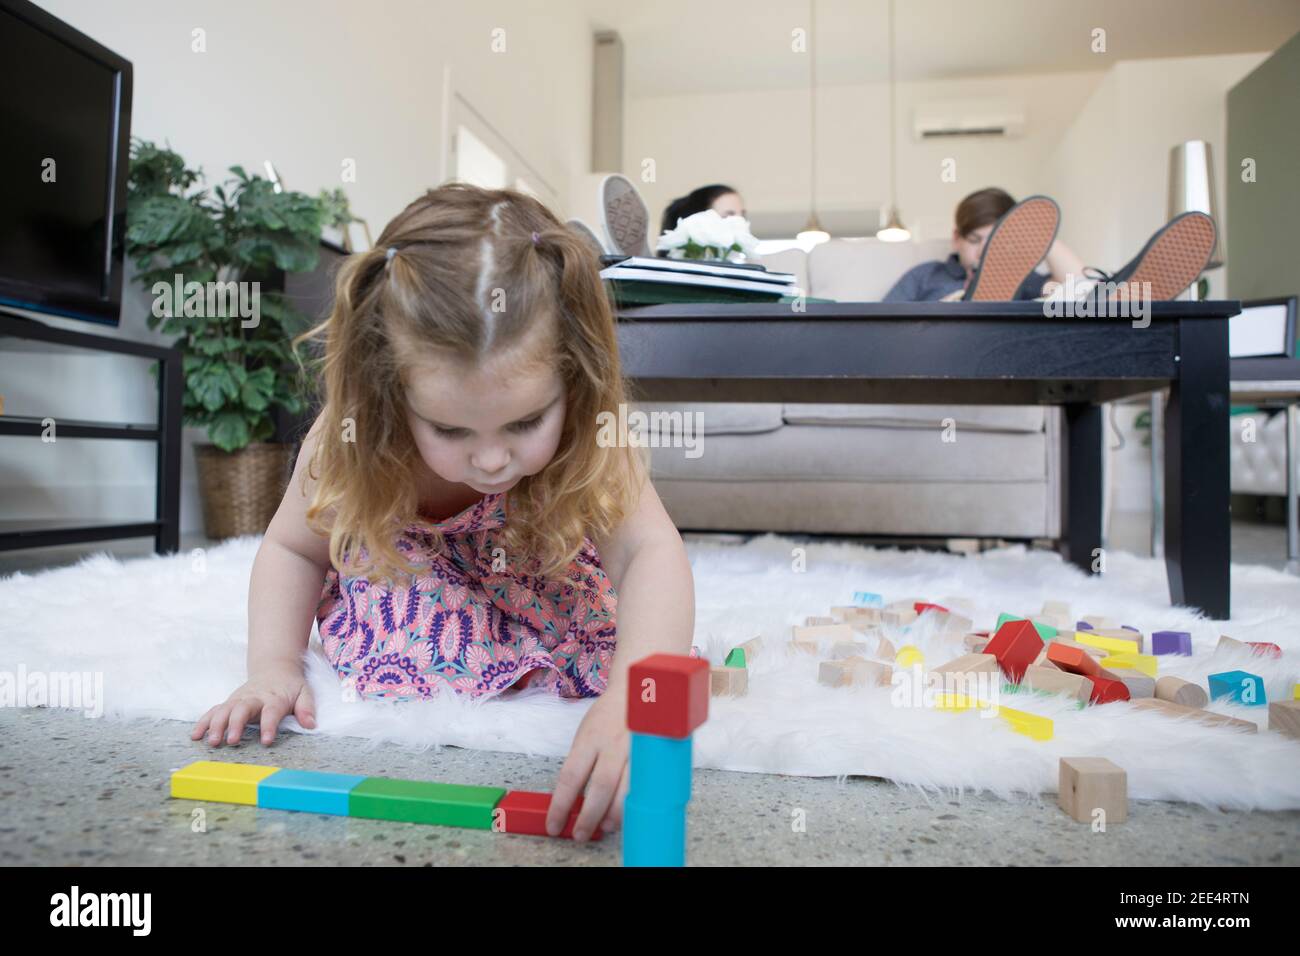 Little girl playing with blocks on the floor. Teenage siblings sit on the couch behind her. Stock Photo